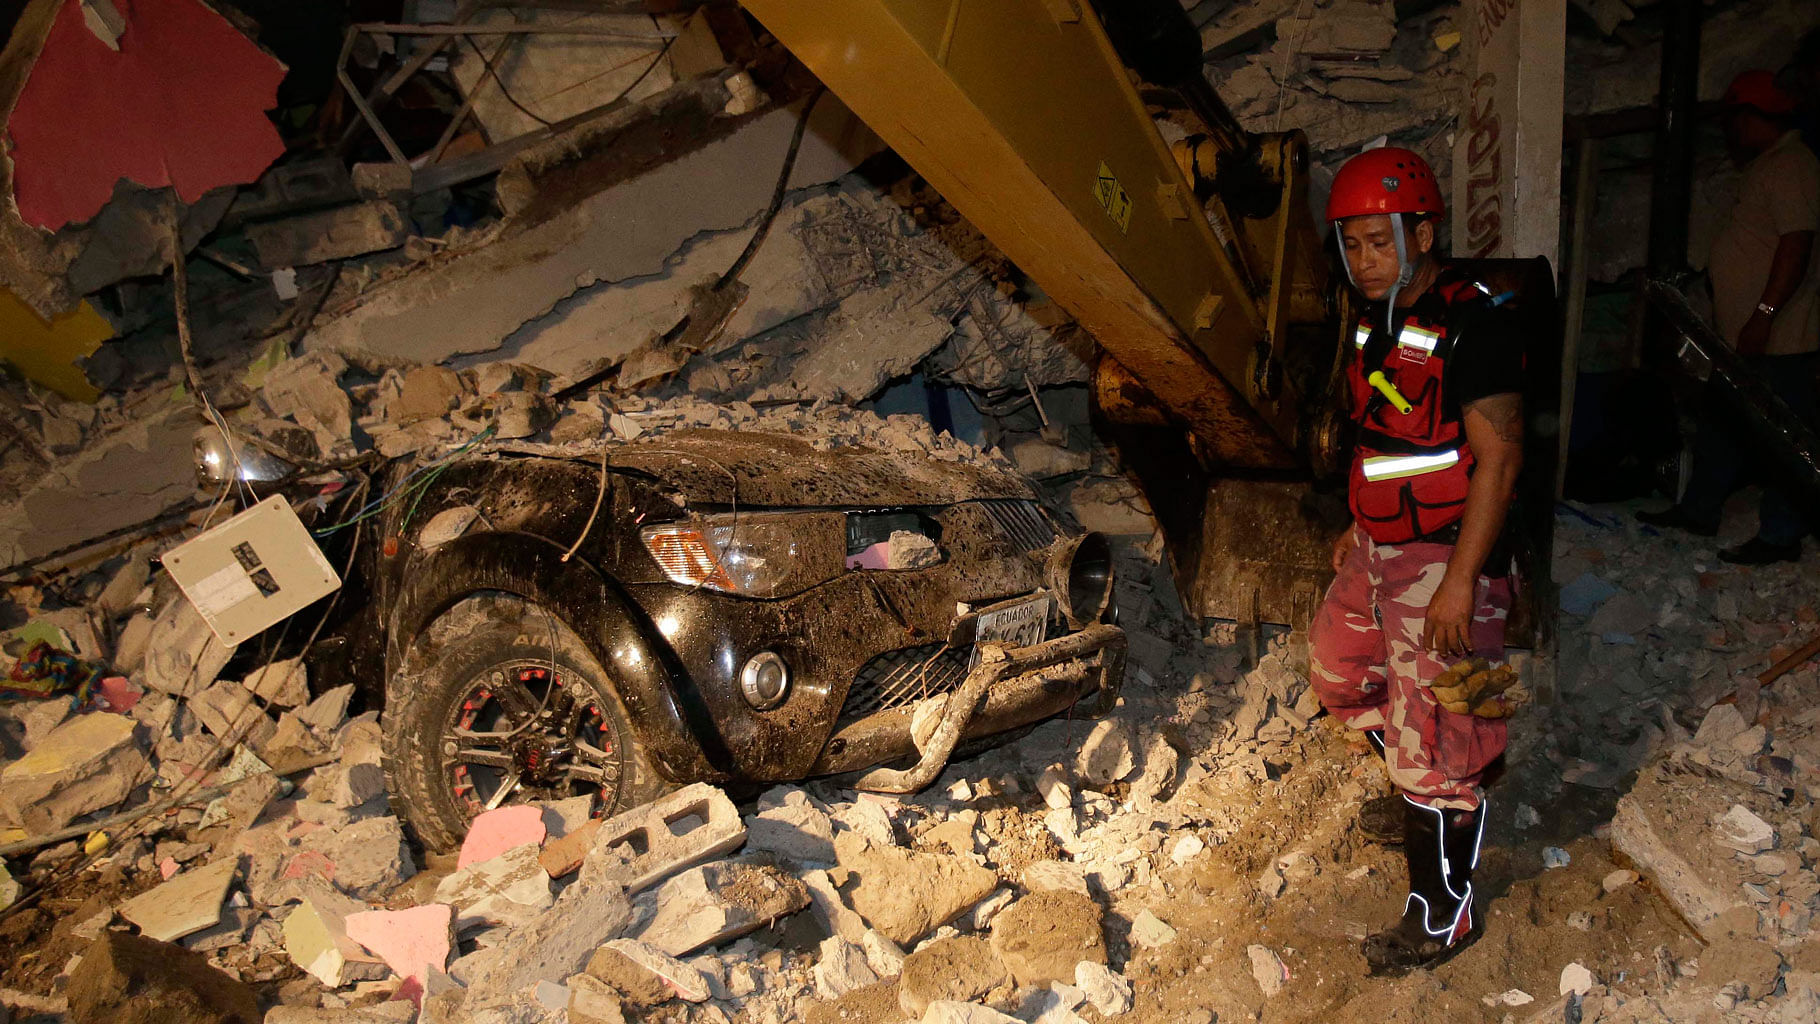 

A rescue worker searches in the rubble of a destroyed house in the Pacific coastal town of Pedernales, Ecuador on Sunday. (Photo: AP)